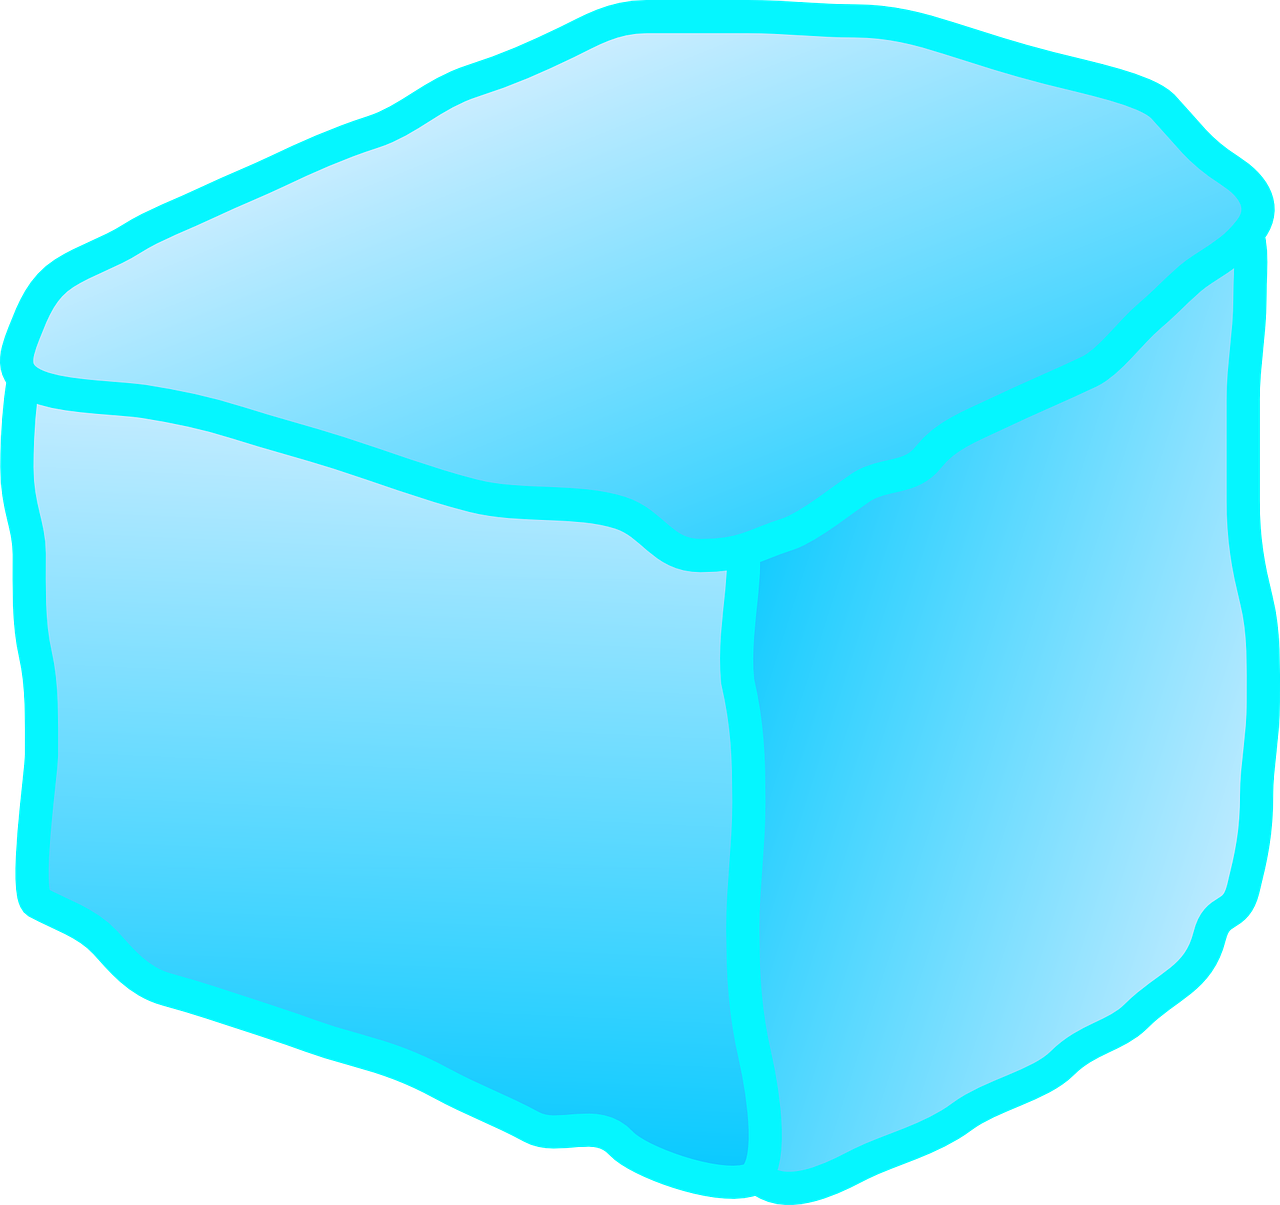 ice,cube,block,melting,water,frozen,free vector graphics,free pictures, free photos, free images, royalty free, free illustrations, public domain